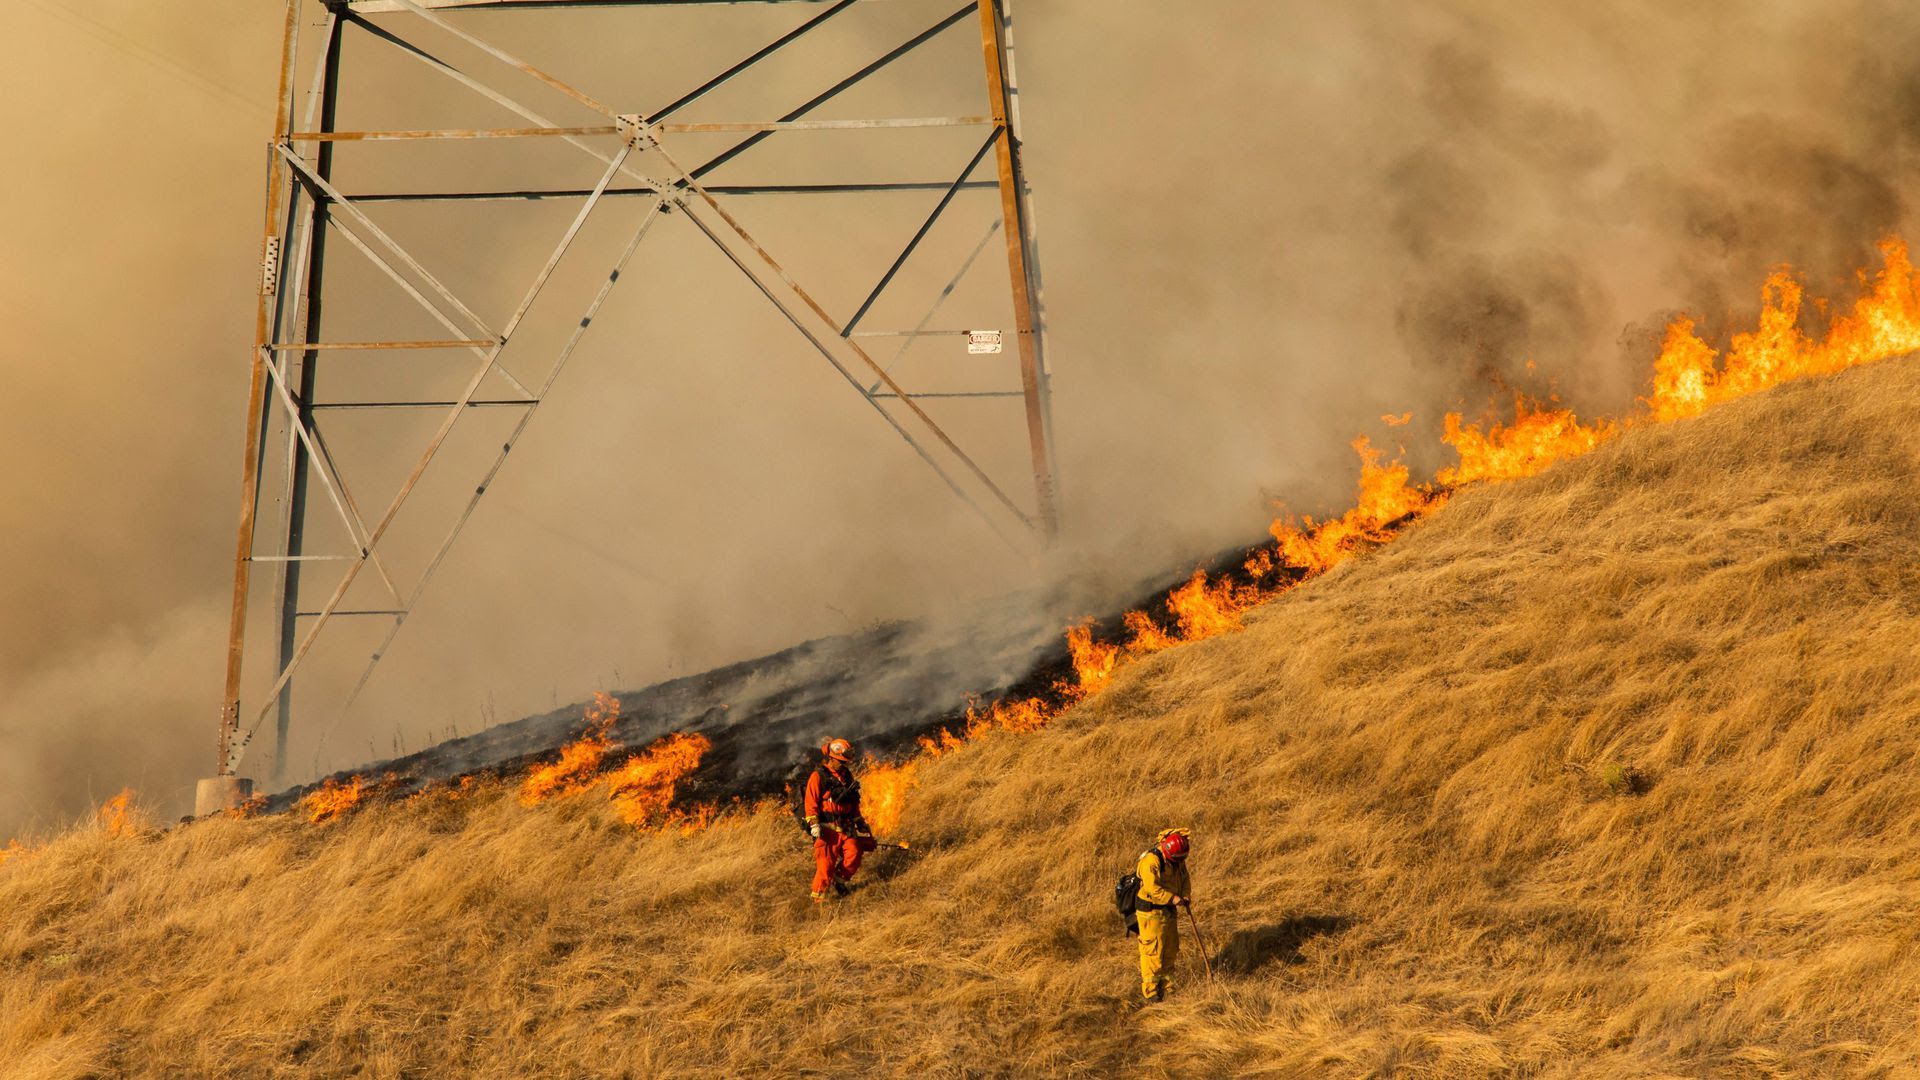 A fire burns in a field by an electric facility.